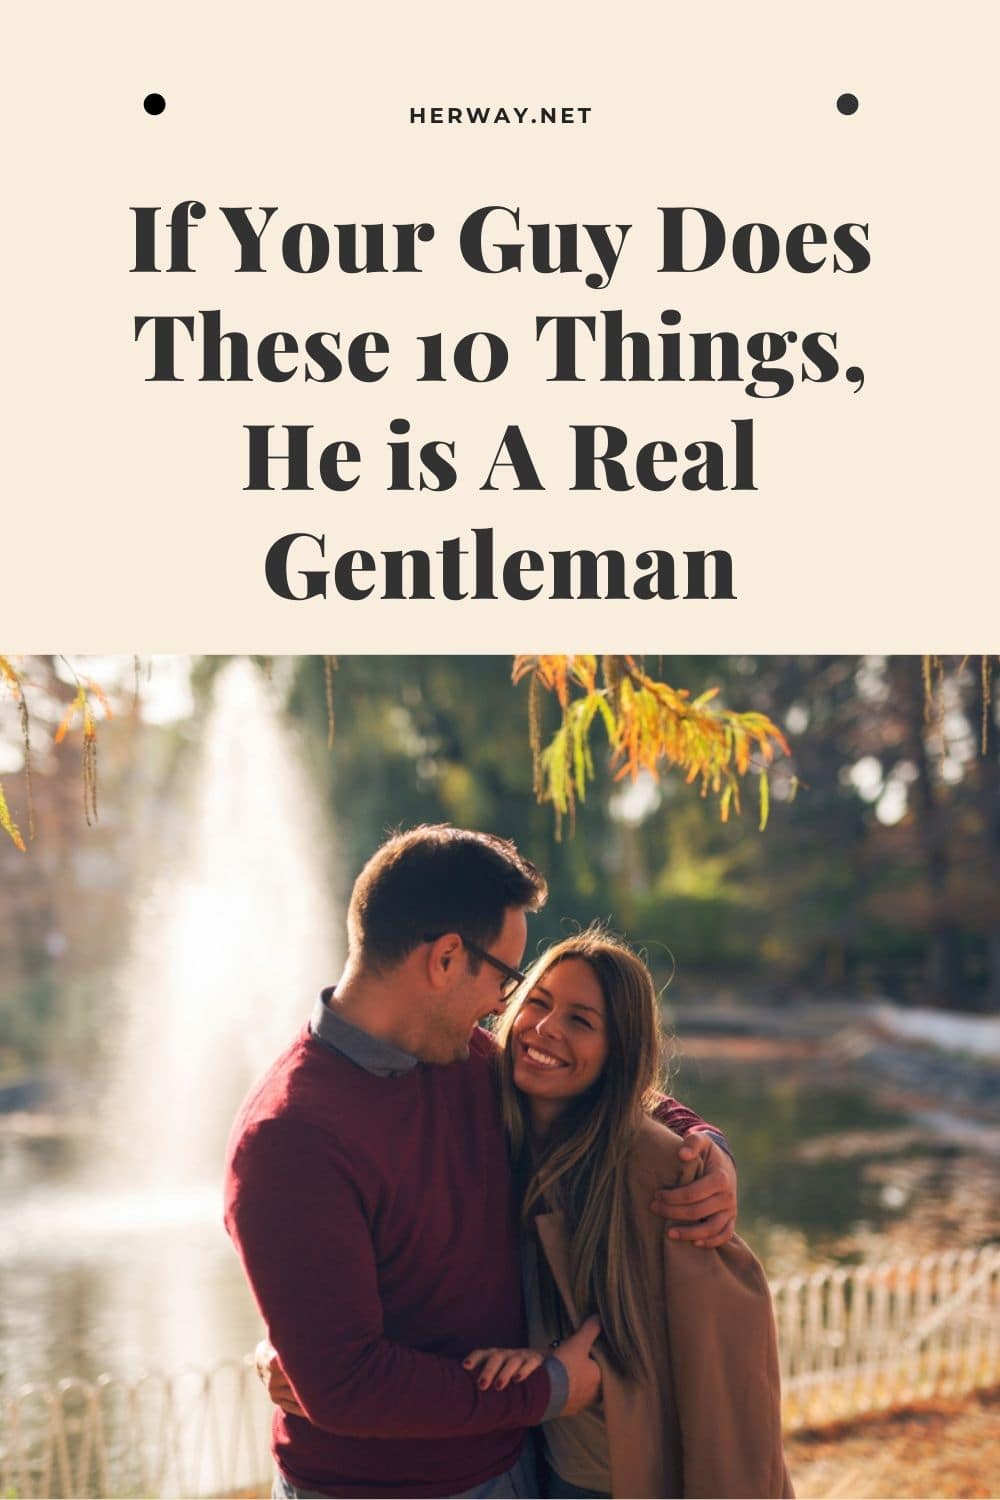 If Your Guy Does These 10 Things, He is A Real Gentleman